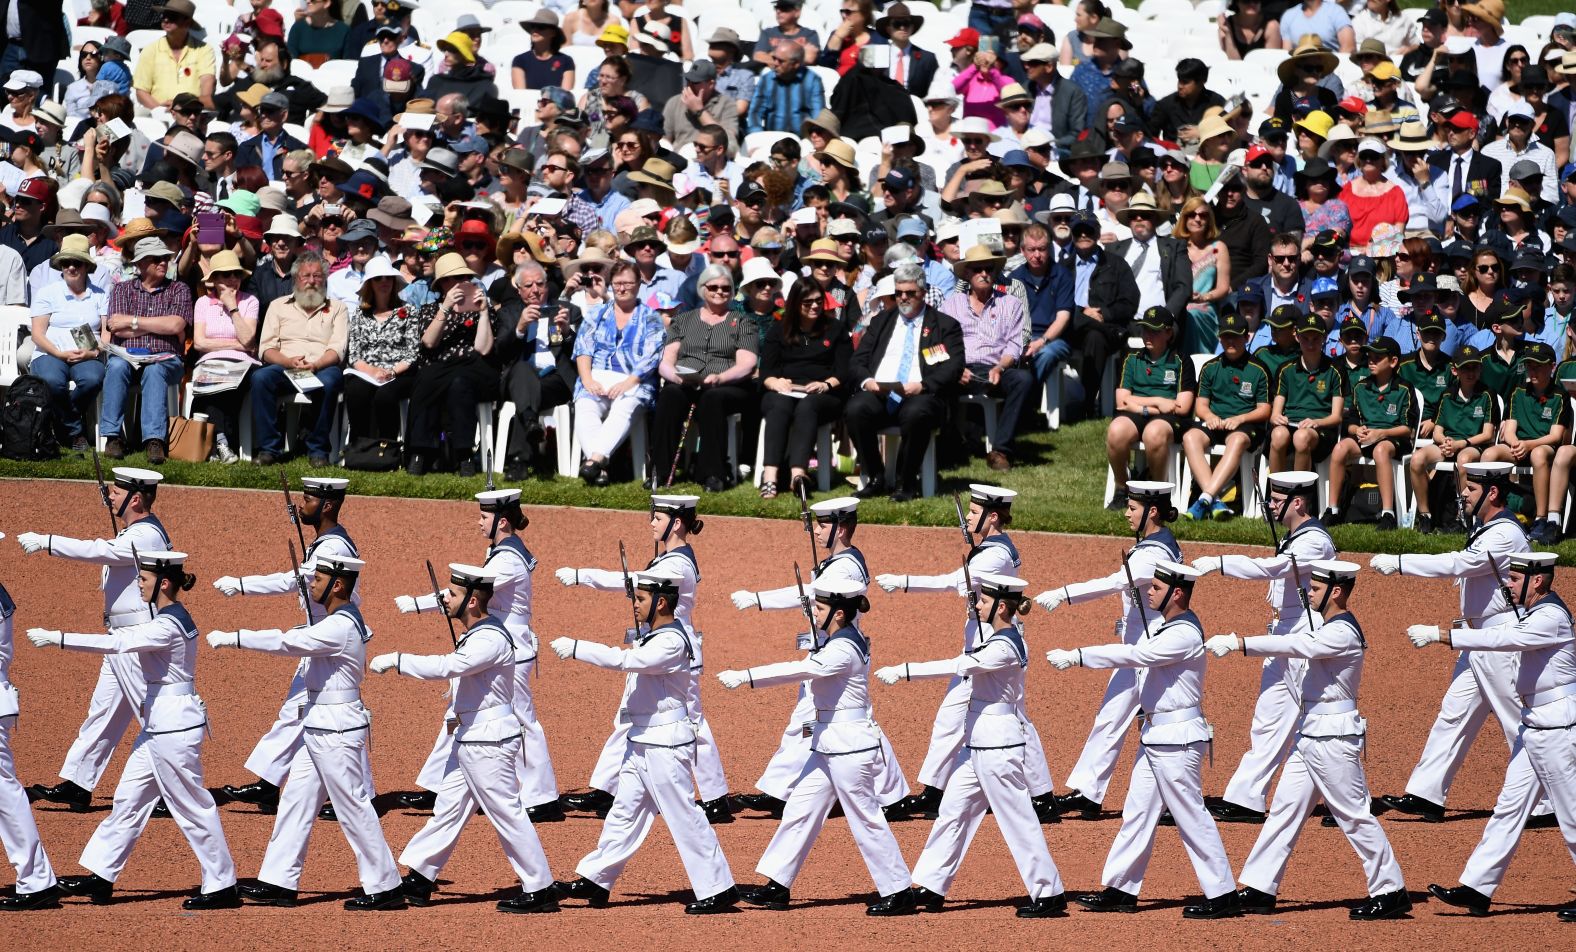 Soldiers march in a military parade during the Remembrance Day Service at the Australian War Memorial on Sunday in Canberra. Almost 62,000 Australians died in WWI, which lasted from 1914-1918.